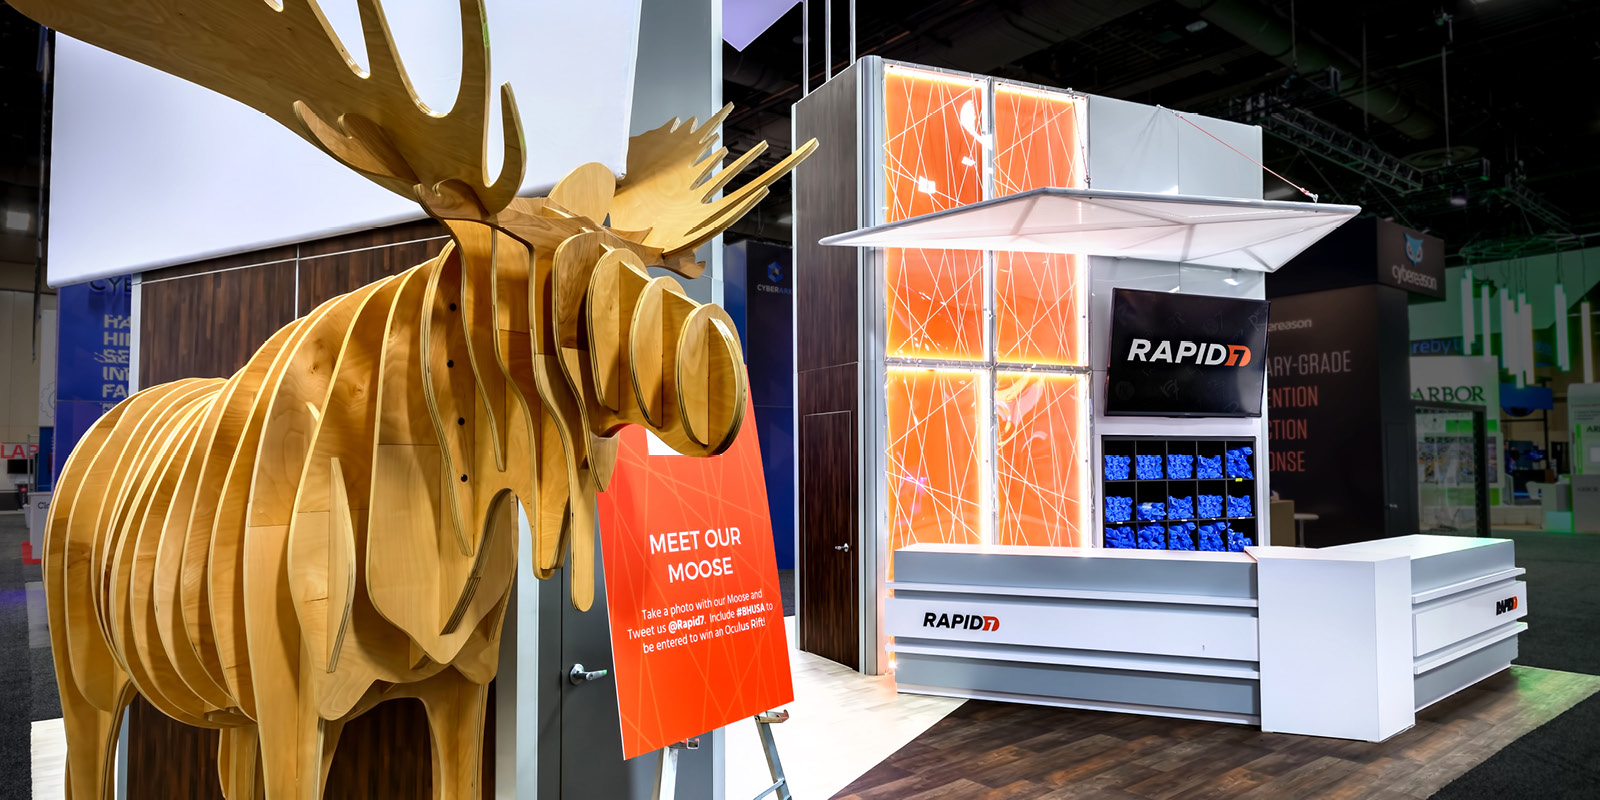 Hill & Partners Rental Branded Environment Trade Show Exhibit for Rapid7